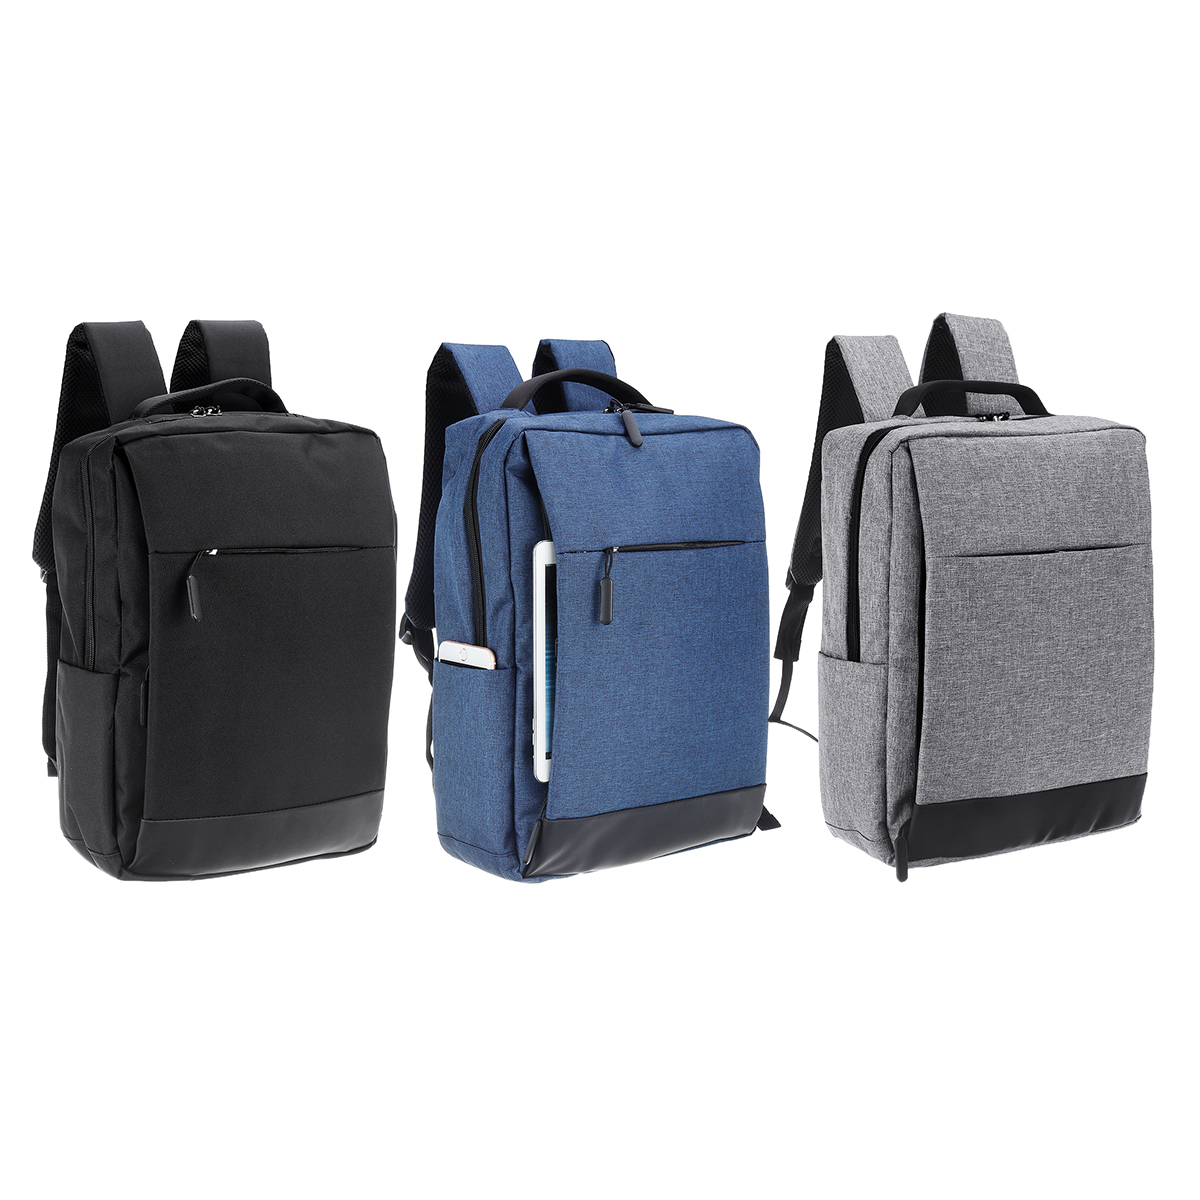 156quot-Anti-theft-Backpack-Laptop-Notebook-Travel-School-PC-Bag-With-USB-Charger-Port-1572886-1